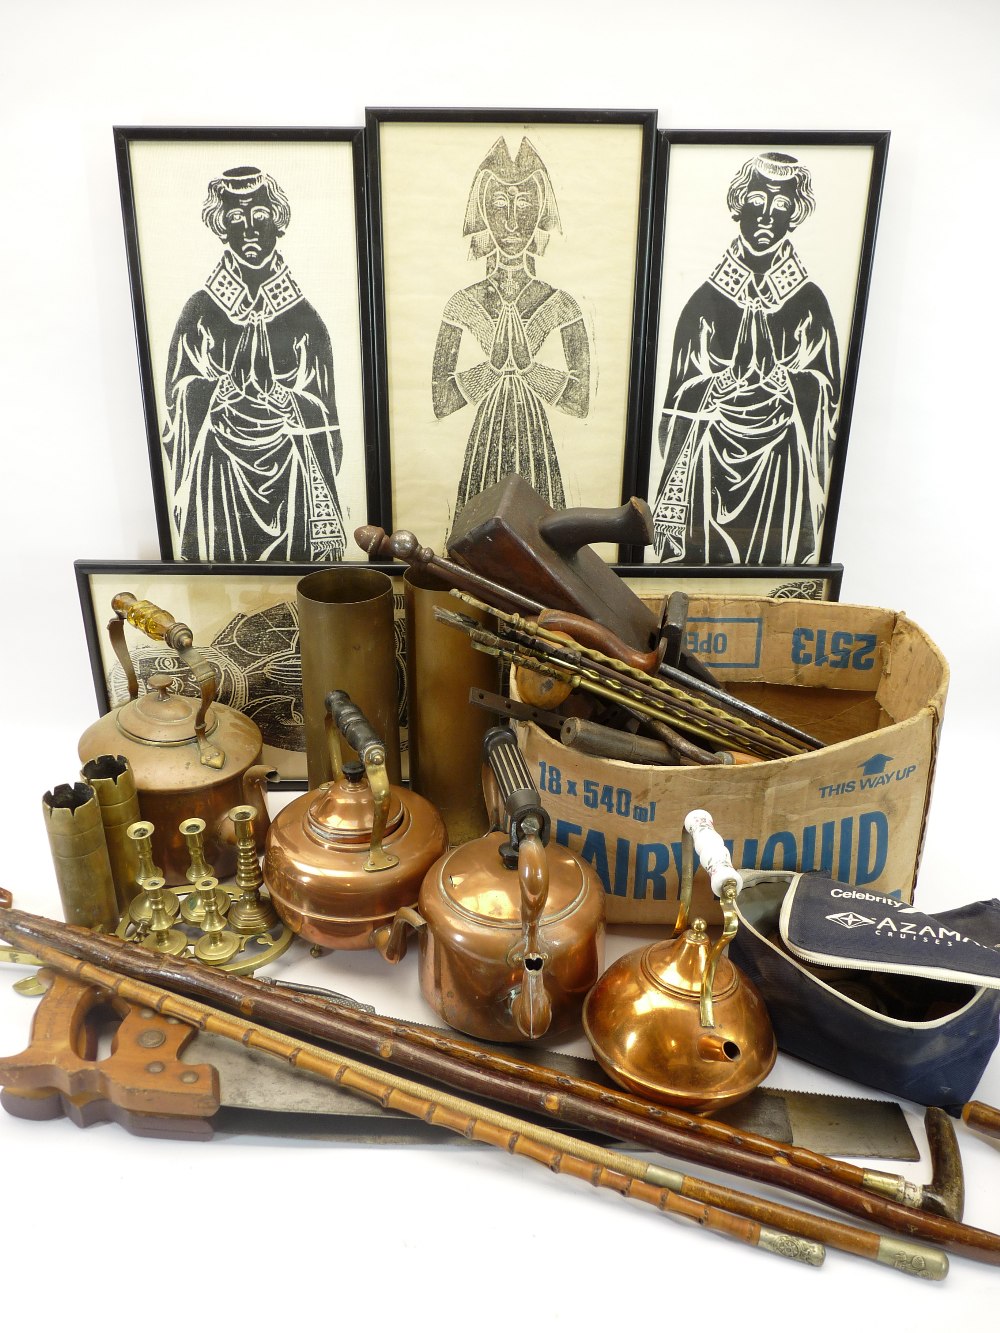 BRASS TRENCH ART, COPPER KETTLES, vintage tools, fire irons, sticks, ETC